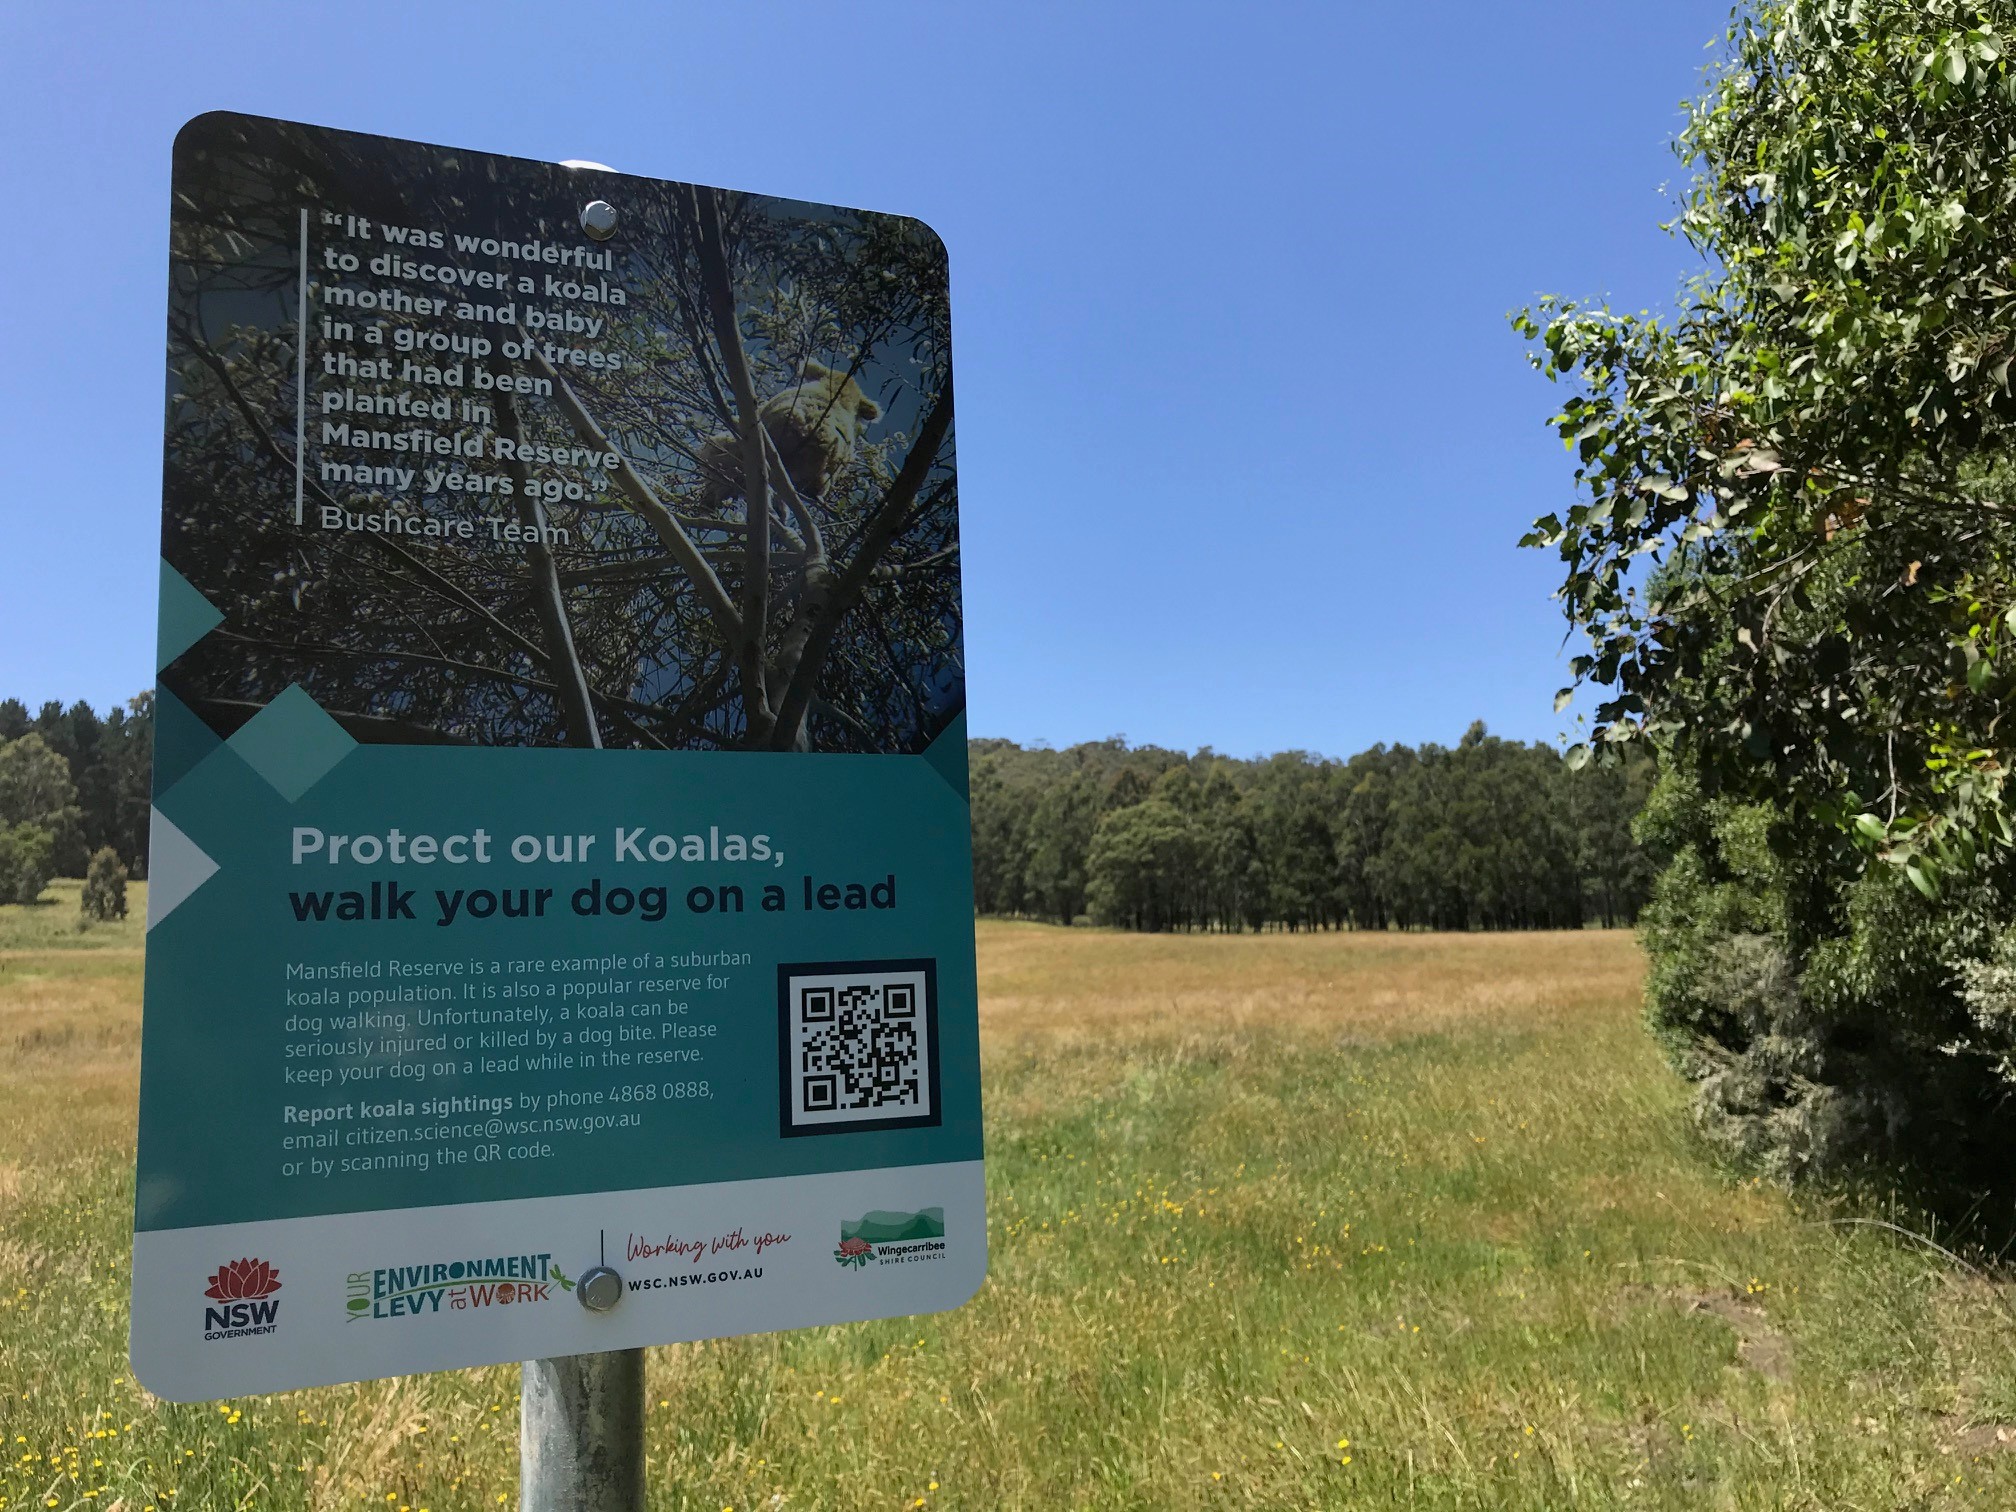 'Protect our koalas, walk your dog on a lead' sign